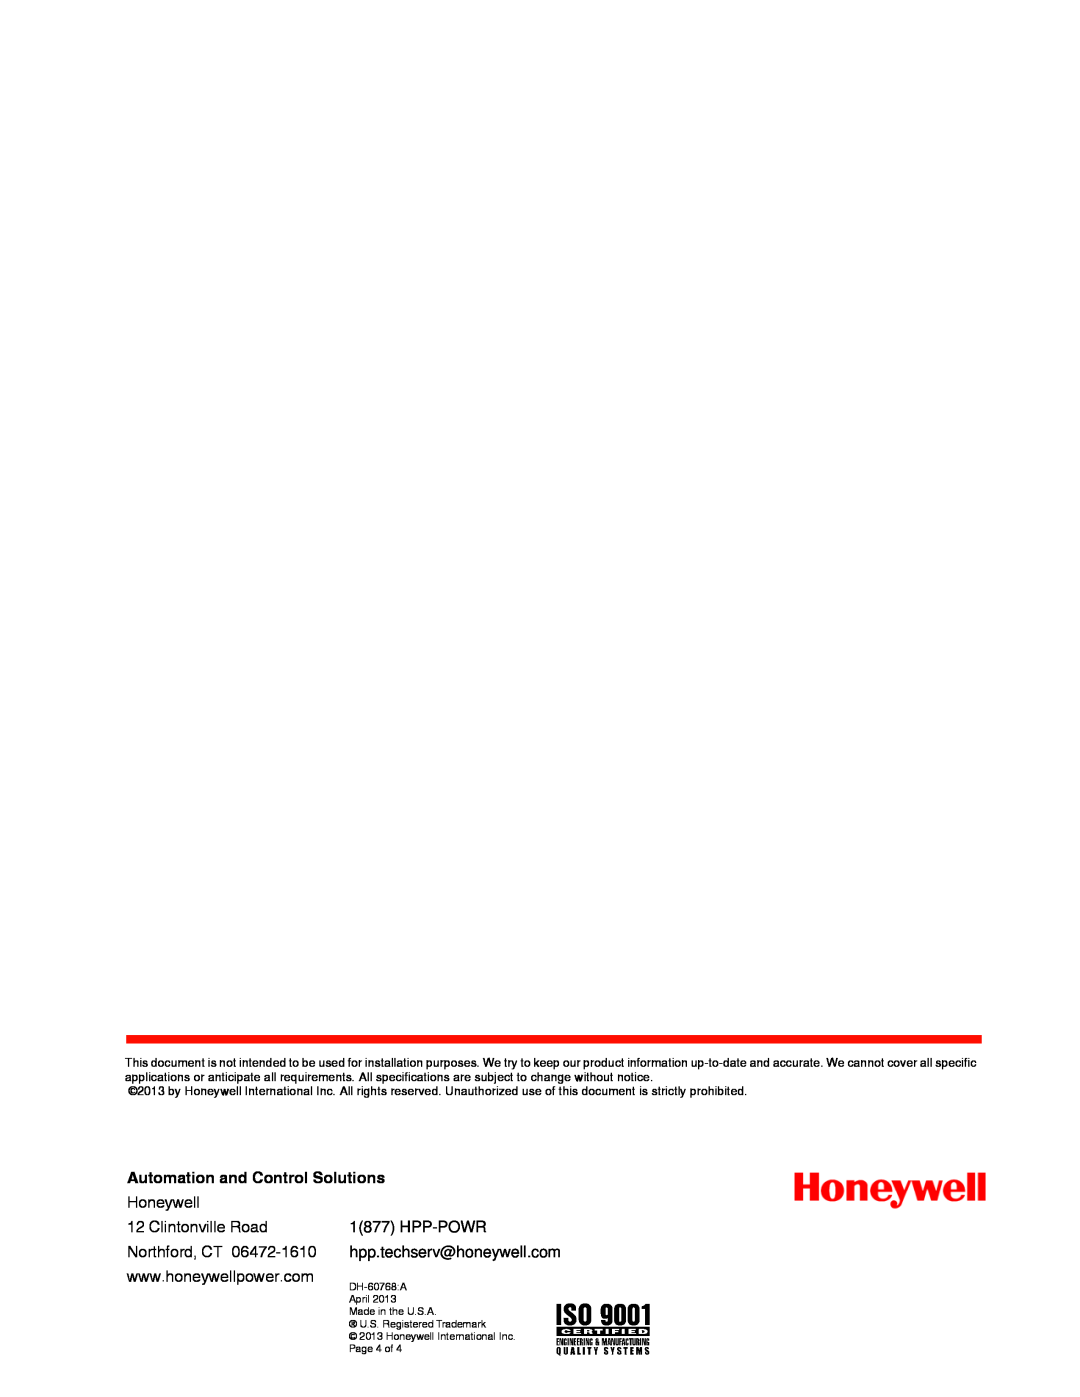 Honeywell MIP-2, UD manual Automation and Control Solutions, Honeywell 